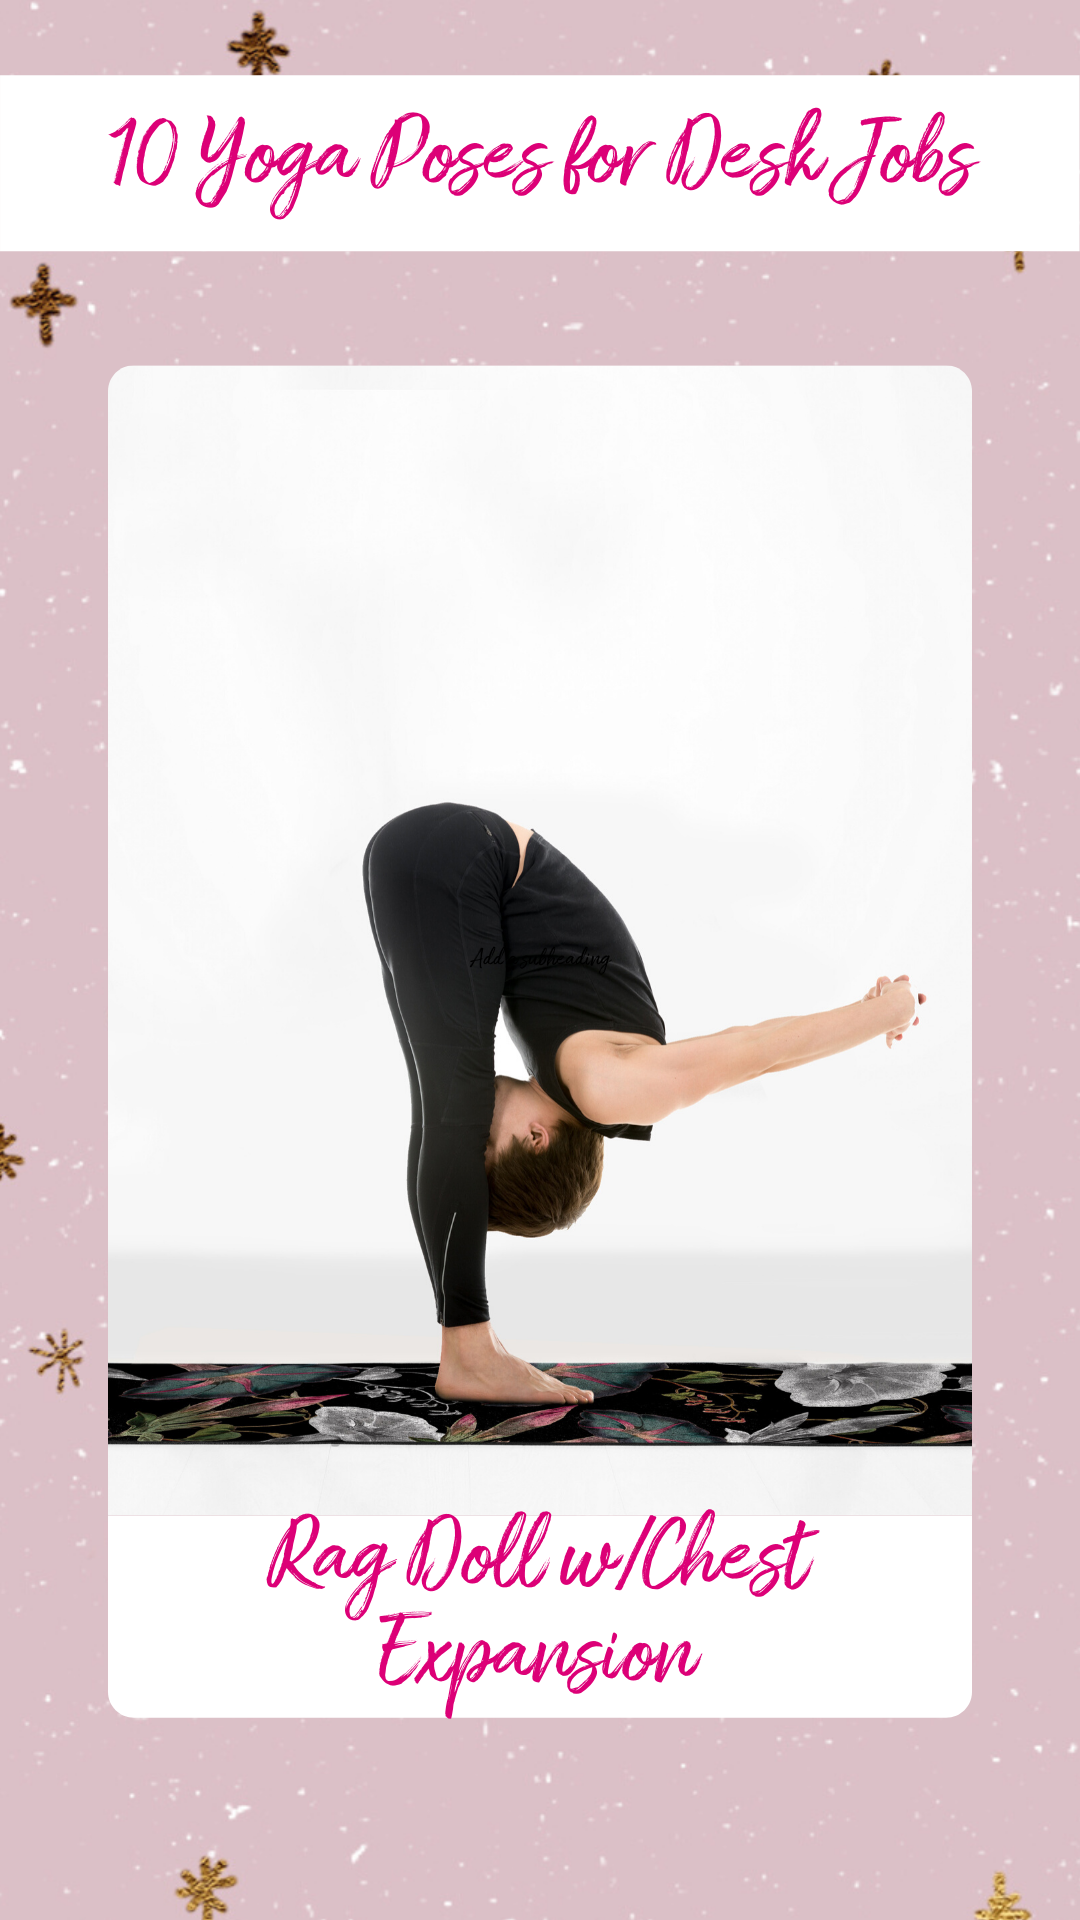 The Most Relaxing Yoga Poses to Unwind | Helen Krag - Movement for Modern  Life Blog